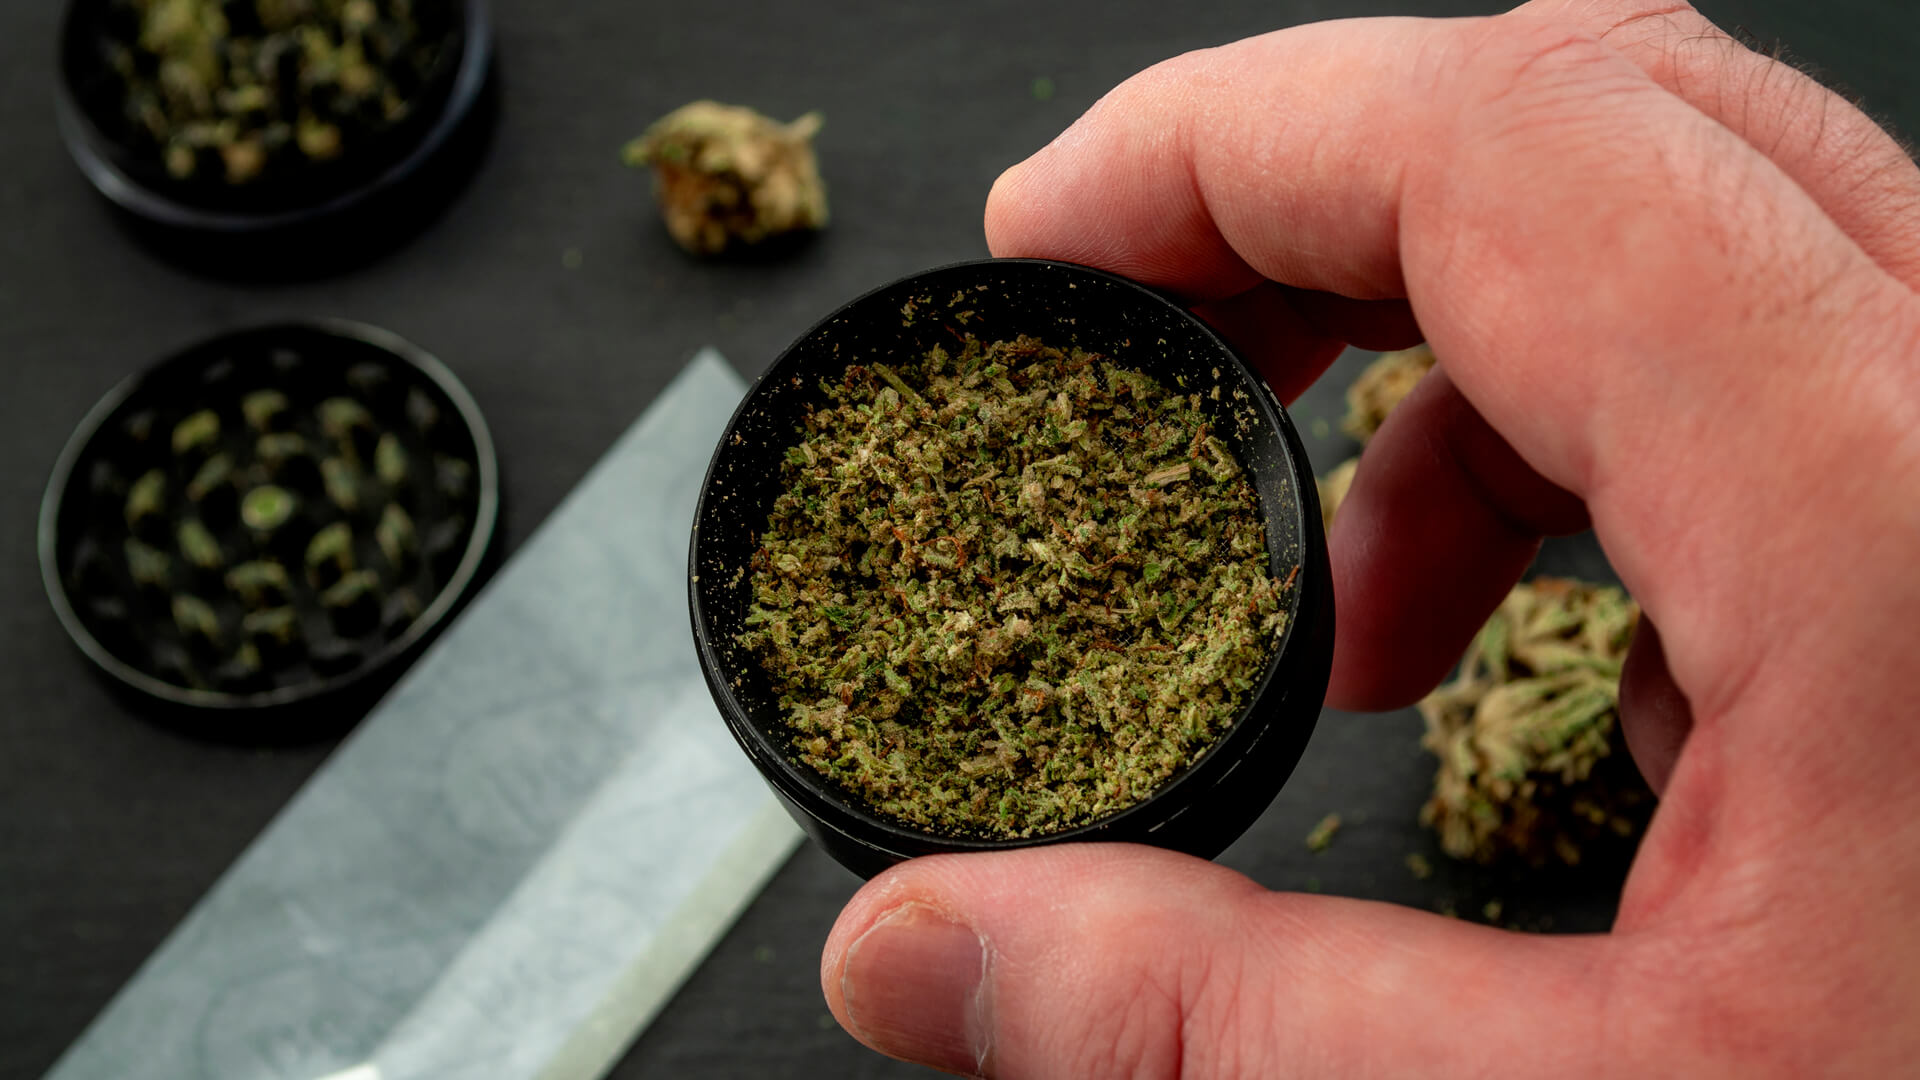 Hand holding a grinder with mid grade weed